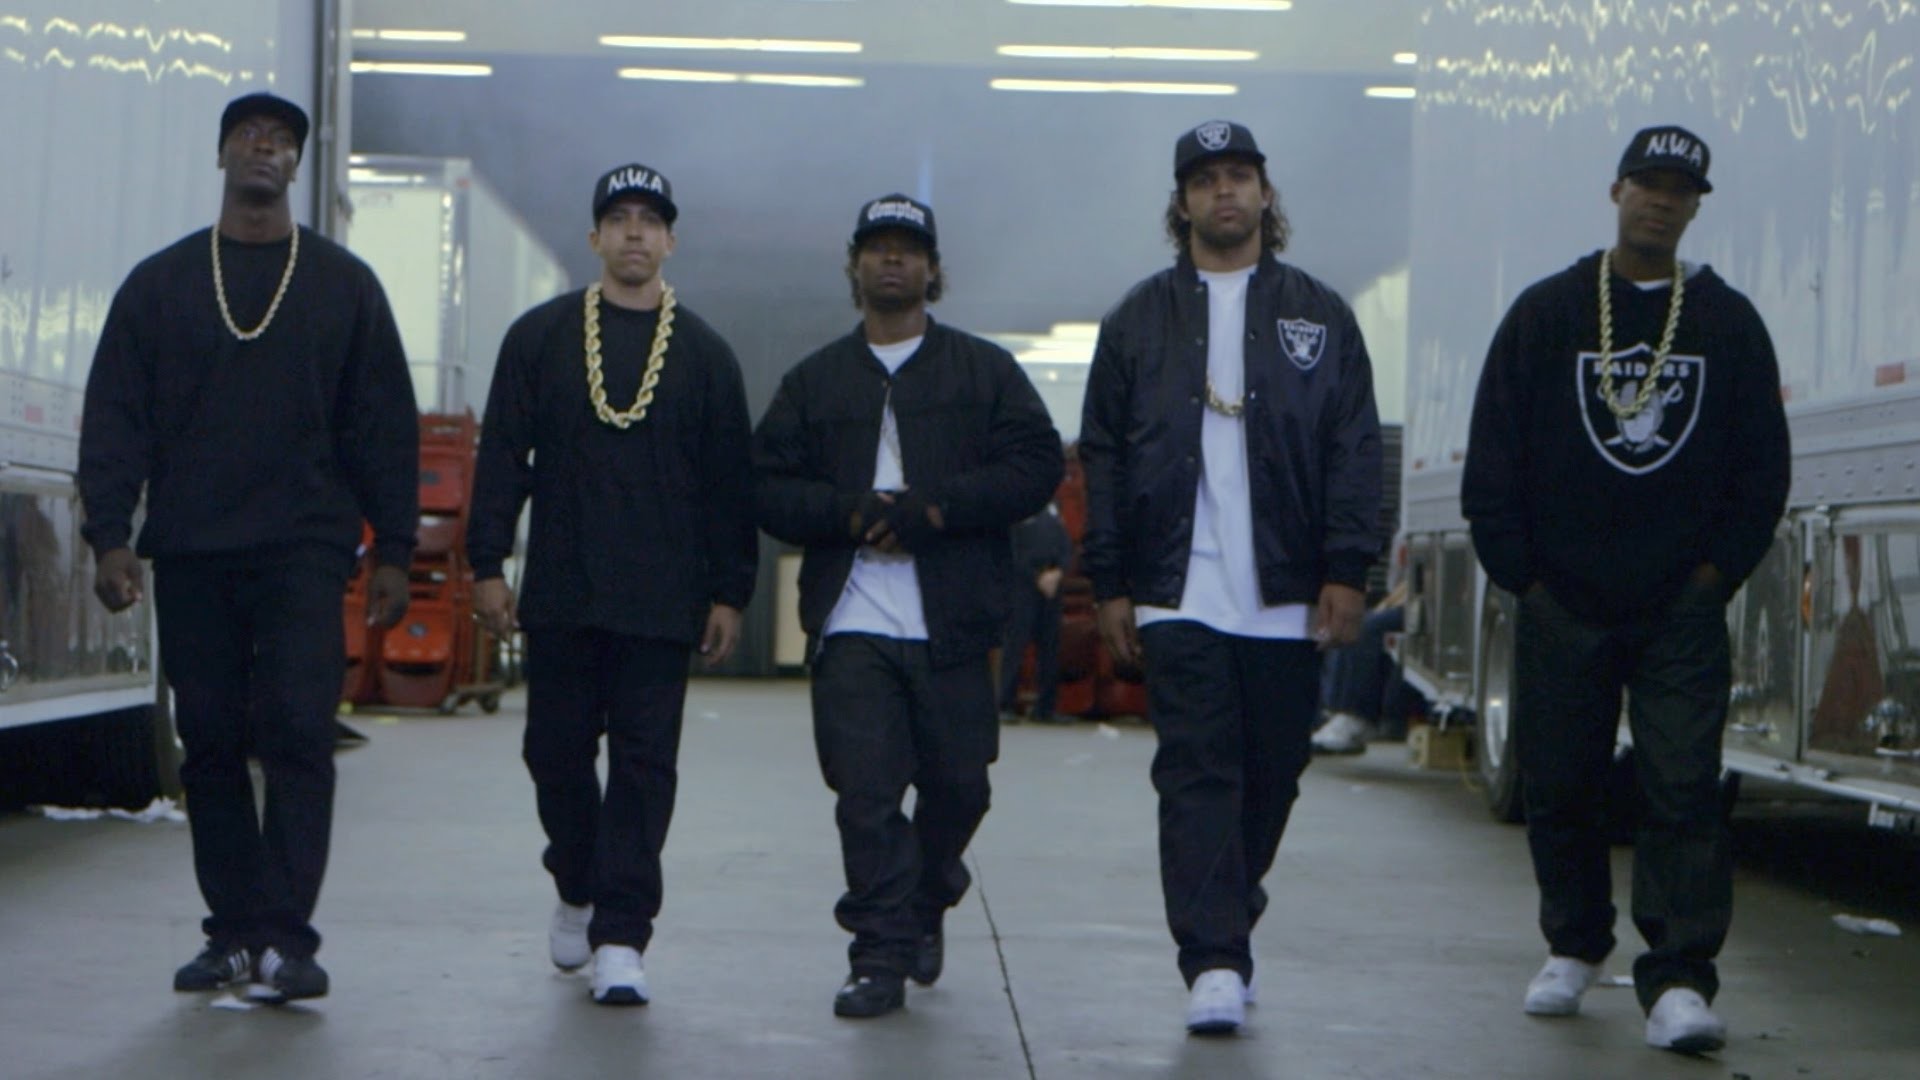 1920x1080 Ice Cube and Dr. Dre - "Straight Outta Compton" - Review